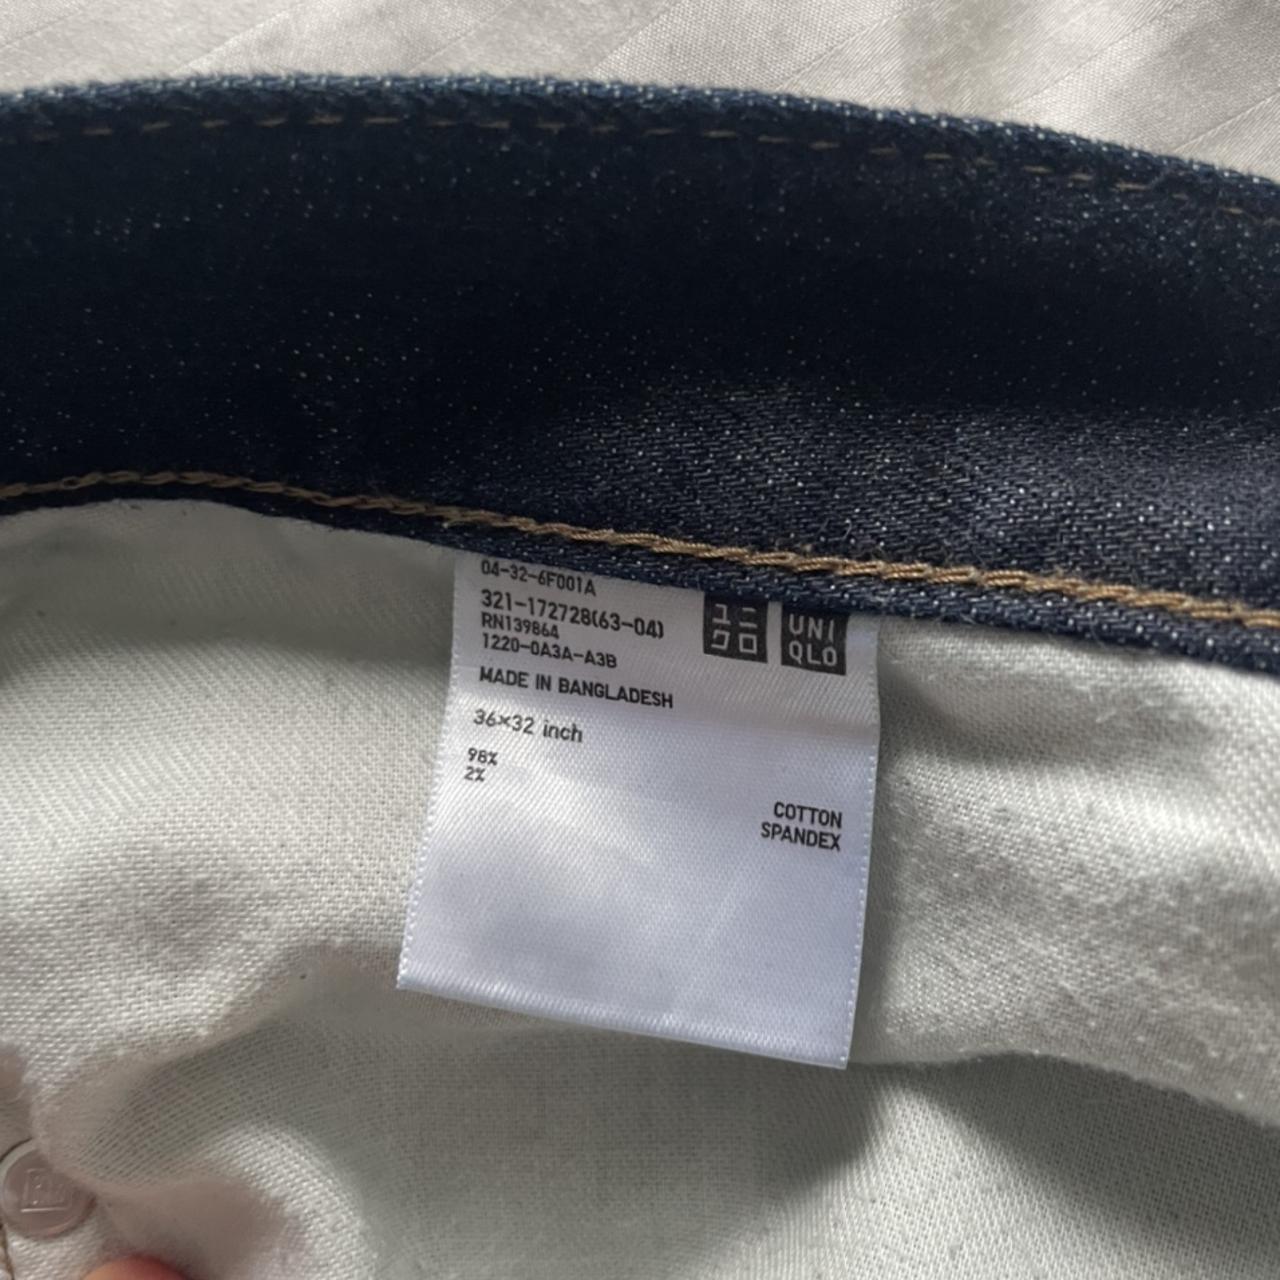 UNIQLO Men's Navy and Blue Jeans | Depop